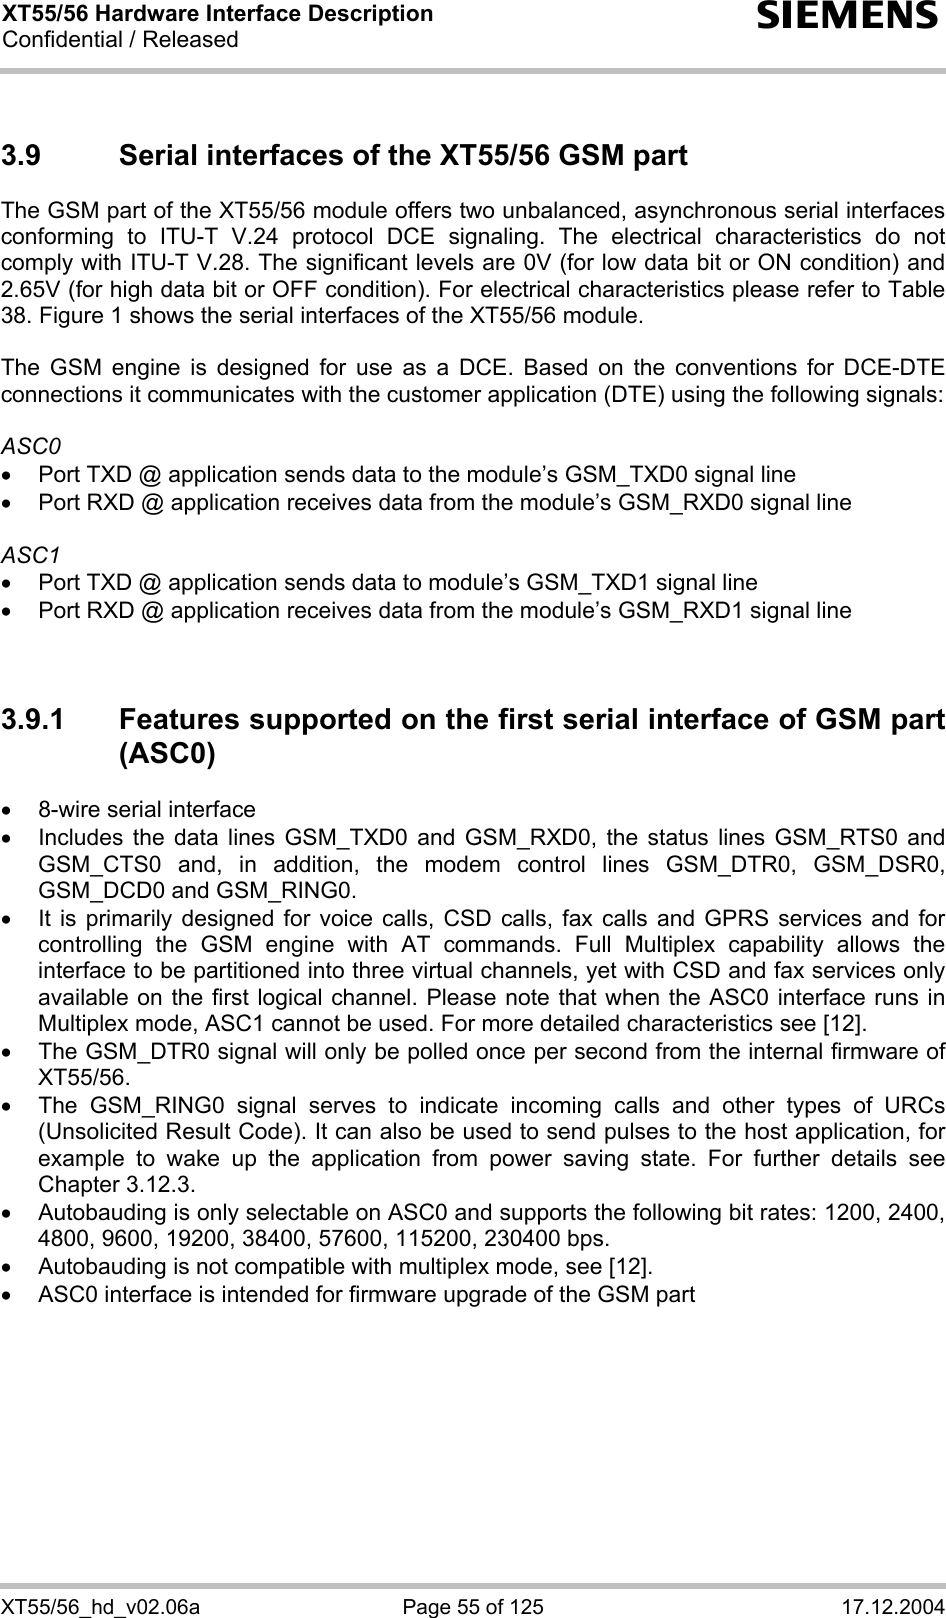 XT55/56 Hardware Interface Description Confidential / Released s XT55/56_hd_v02.06a  Page 55 of 125  17.12.2004 3.9  Serial interfaces of the XT55/56 GSM part The GSM part of the XT55/56 module offers two unbalanced, asynchronous serial interfaces conforming to ITU-T V.24 protocol DCE signaling. The electrical characteristics do not comply with ITU-T V.28. The significant levels are 0V (for low data bit or ON condition) and 2.65V (for high data bit or OFF condition). For electrical characteristics please refer to Table 38. Figure 1 shows the serial interfaces of the XT55/56 module.  The GSM engine is designed for use as a DCE. Based on the conventions for DCE-DTE connections it communicates with the customer application (DTE) using the following signals:  ASC0 •  Port TXD @ application sends data to the module’s GSM_TXD0 signal line •  Port RXD @ application receives data from the module’s GSM_RXD0 signal line  ASC1 •  Port TXD @ application sends data to module’s GSM_TXD1 signal line •  Port RXD @ application receives data from the module’s GSM_RXD1 signal line   3.9.1  Features supported on the first serial interface of GSM part (ASC0) •  8-wire serial interface •  Includes the data lines GSM_TXD0 and GSM_RXD0, the status lines GSM_RTS0 and GSM_CTS0 and, in addition, the modem control lines GSM_DTR0, GSM_DSR0, GSM_DCD0 and GSM_RING0.  •  It is primarily designed for voice calls, CSD calls, fax calls and GPRS services and for controlling the GSM engine with AT commands. Full Multiplex capability allows the interface to be partitioned into three virtual channels, yet with CSD and fax services only available on the first logical channel. Please note that when the ASC0 interface runs in Multiplex mode, ASC1 cannot be used. For more detailed characteristics see [12]. •  The GSM_DTR0 signal will only be polled once per second from the internal firmware of XT55/56.  •  The GSM_RING0 signal serves to indicate incoming calls and other types of URCs (Unsolicited Result Code). It can also be used to send pulses to the host application, for example to wake up the application from power saving state. For further details see Chapter 3.12.3. •  Autobauding is only selectable on ASC0 and supports the following bit rates: 1200, 2400, 4800, 9600, 19200, 38400, 57600, 115200, 230400 bps.  •  Autobauding is not compatible with multiplex mode, see [12]. •  ASC0 interface is intended for firmware upgrade of the GSM part   